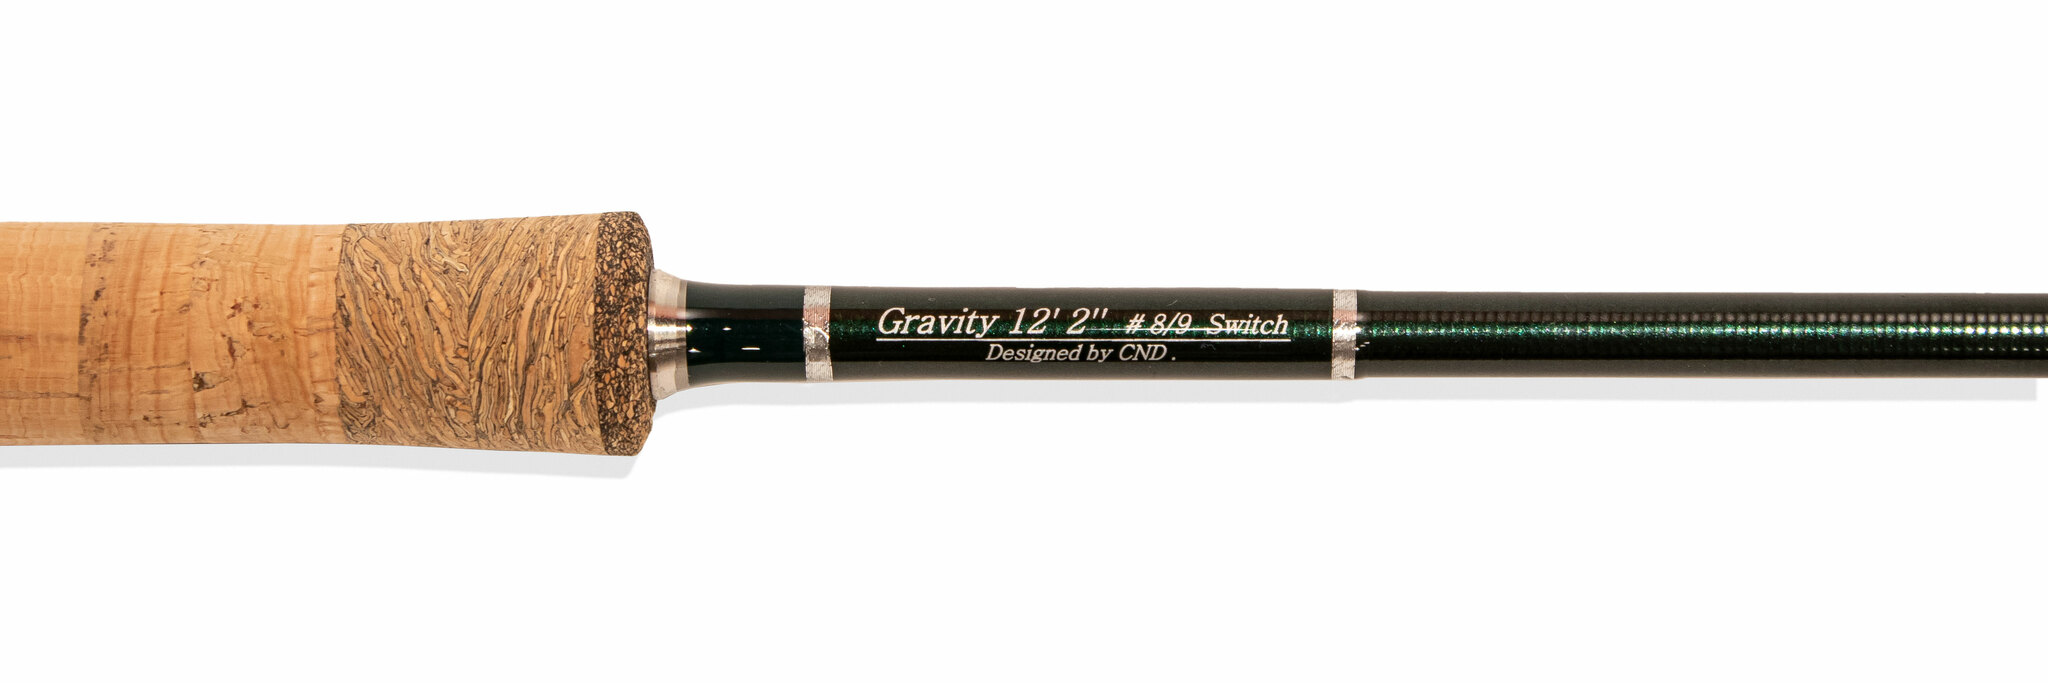 CND Gravity Double Hand